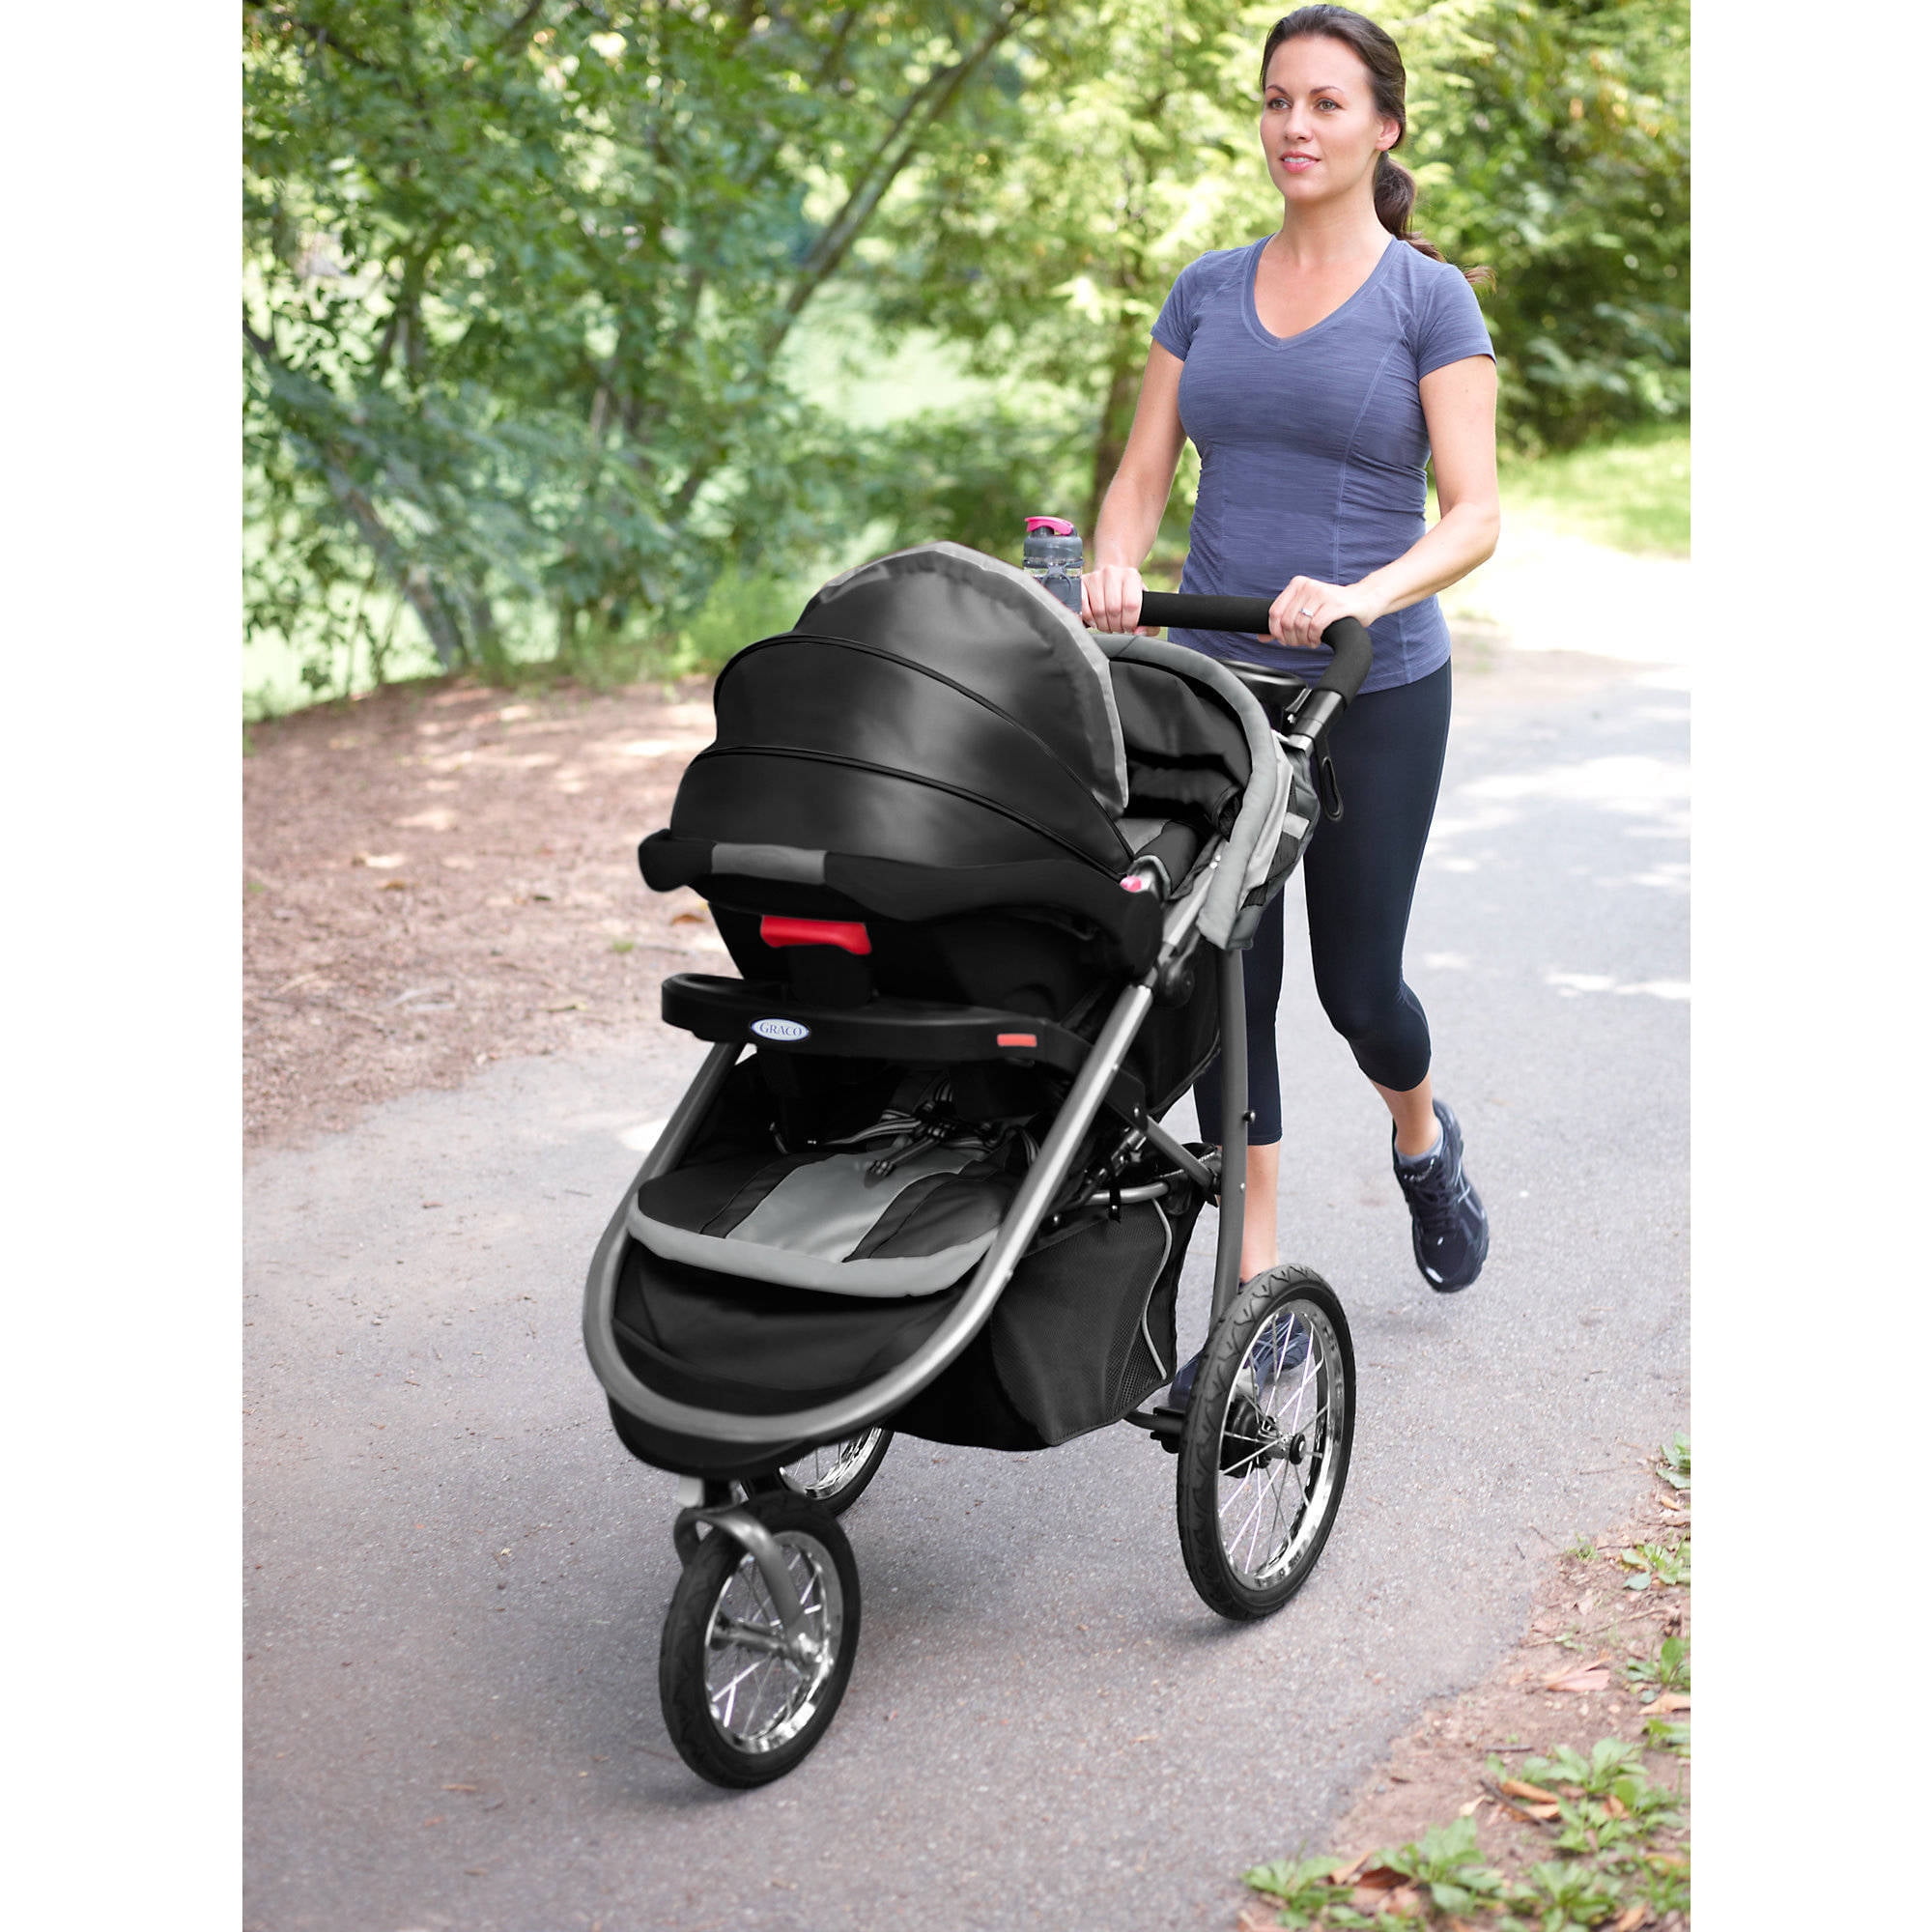 connect stroller